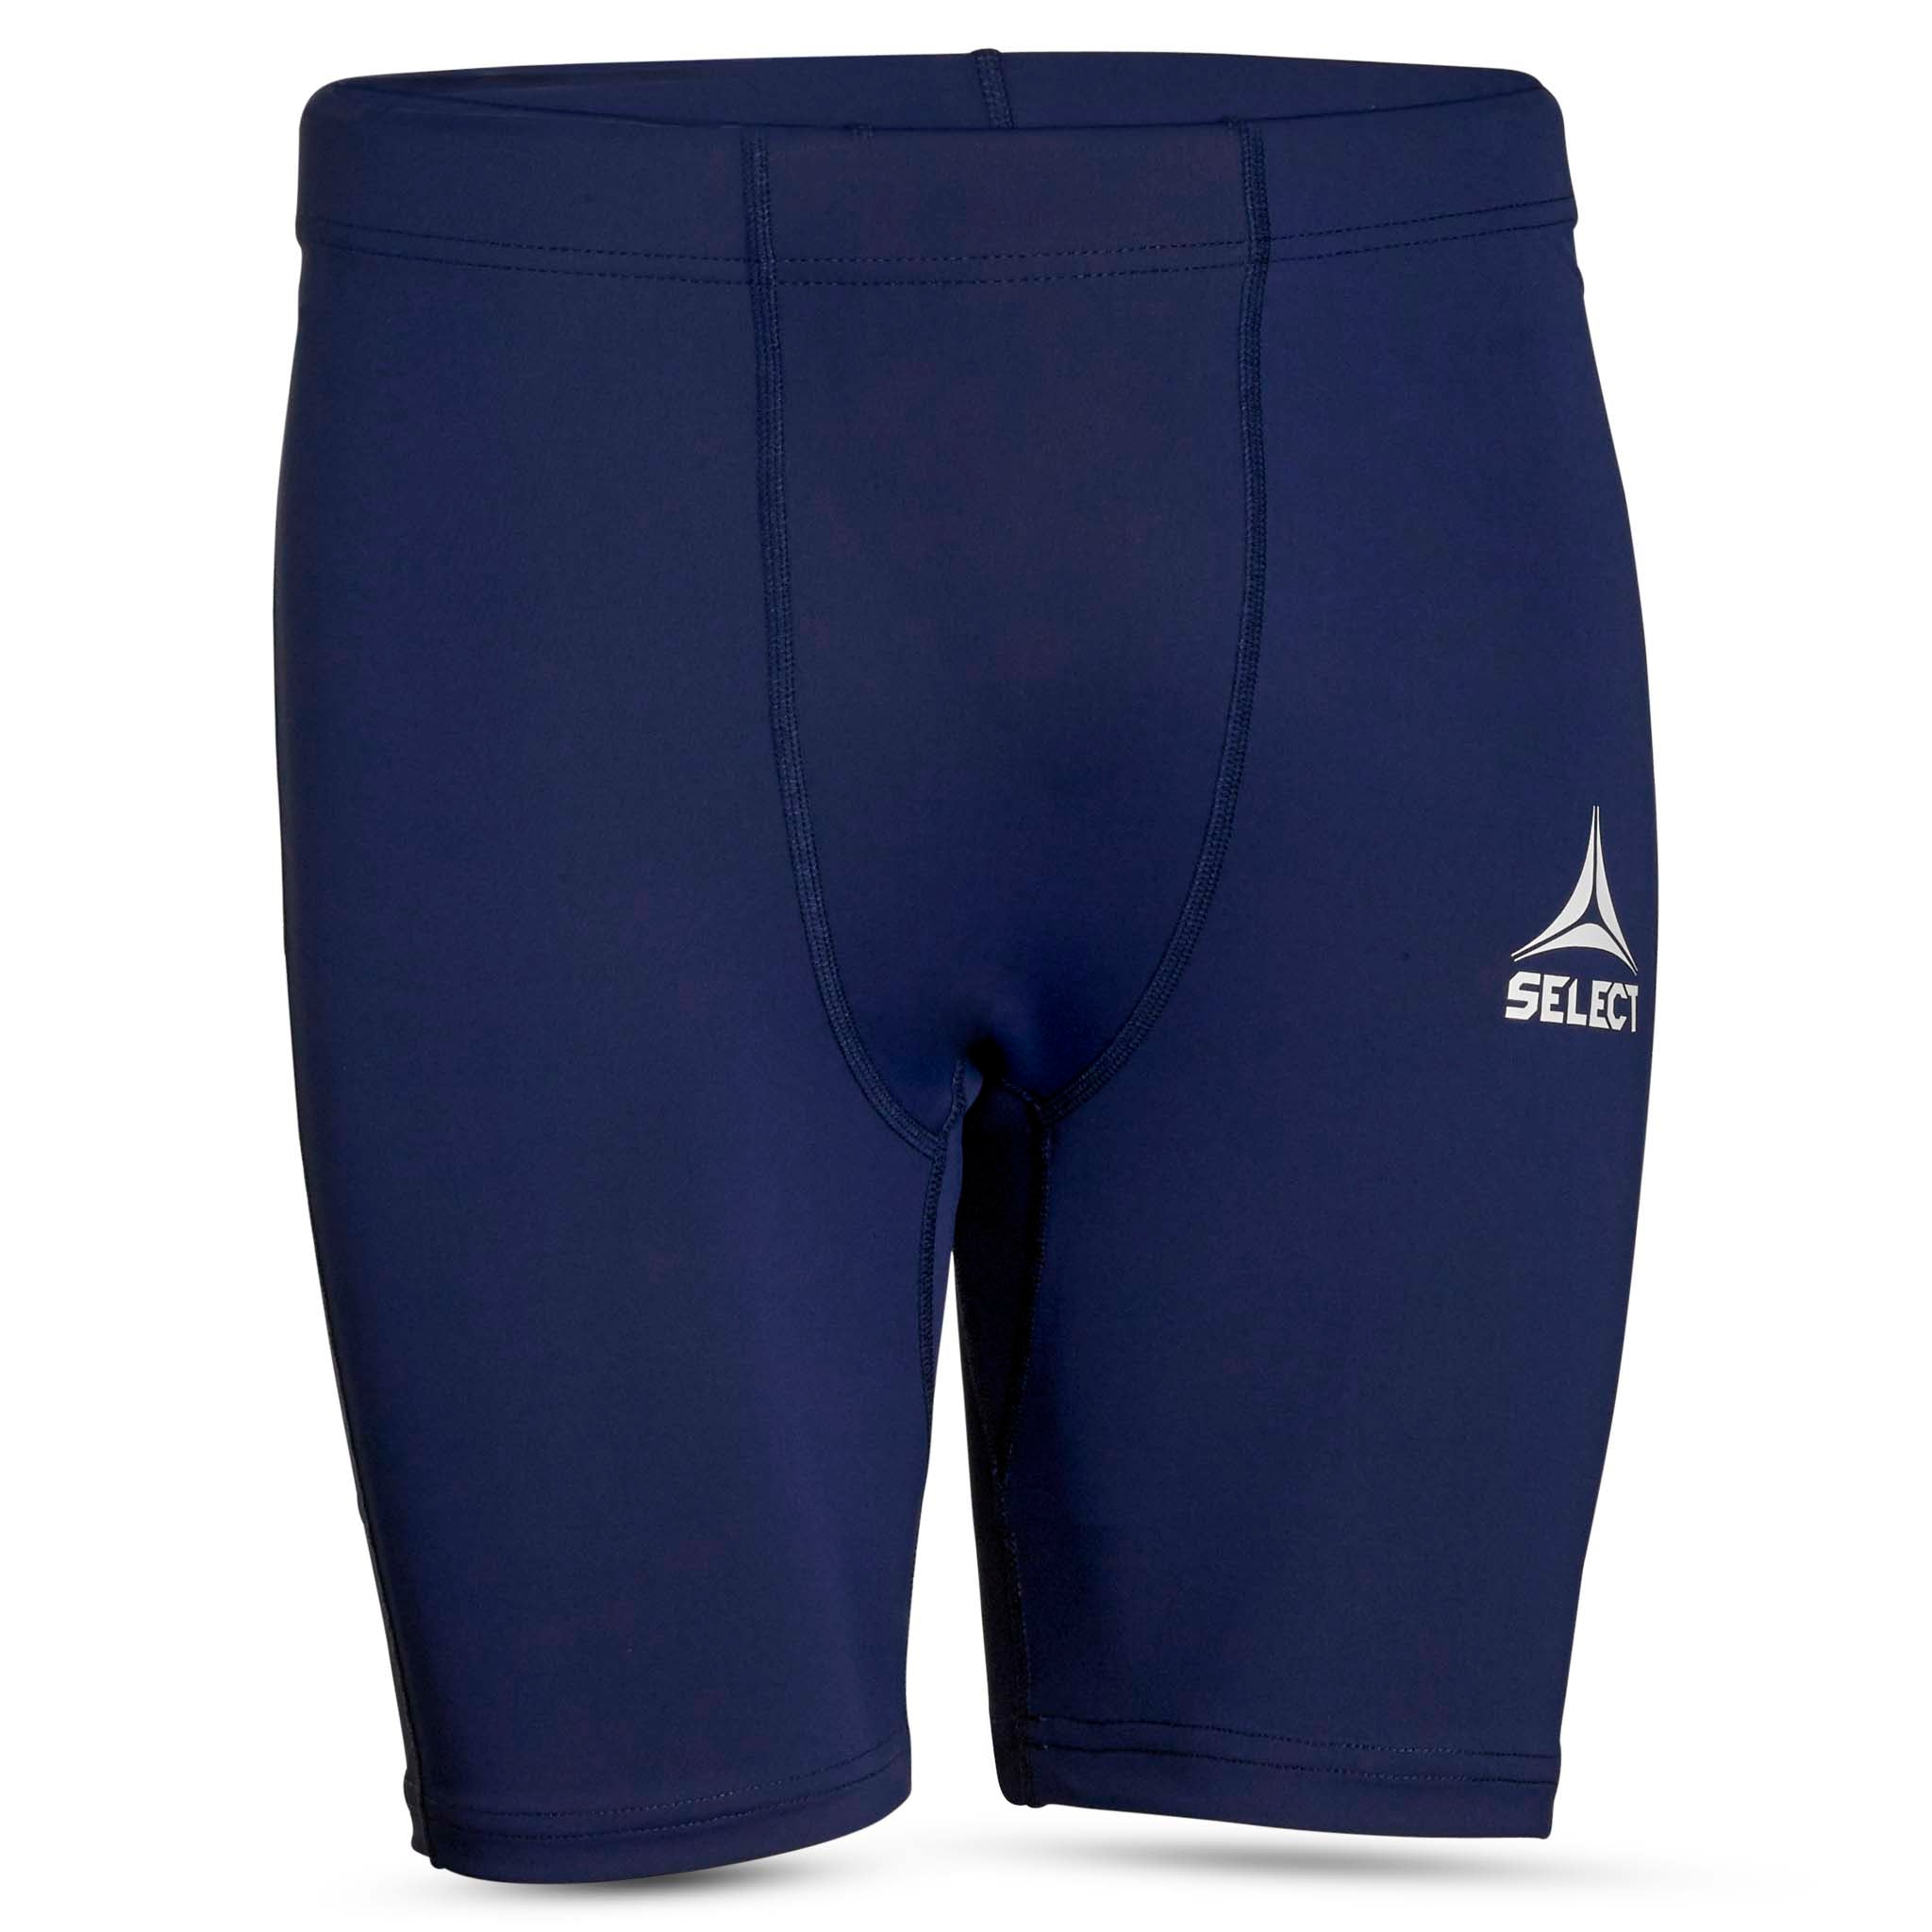 Running Tights - 1/2 Shorts - Sub4 Apparel - Cut To The Chase